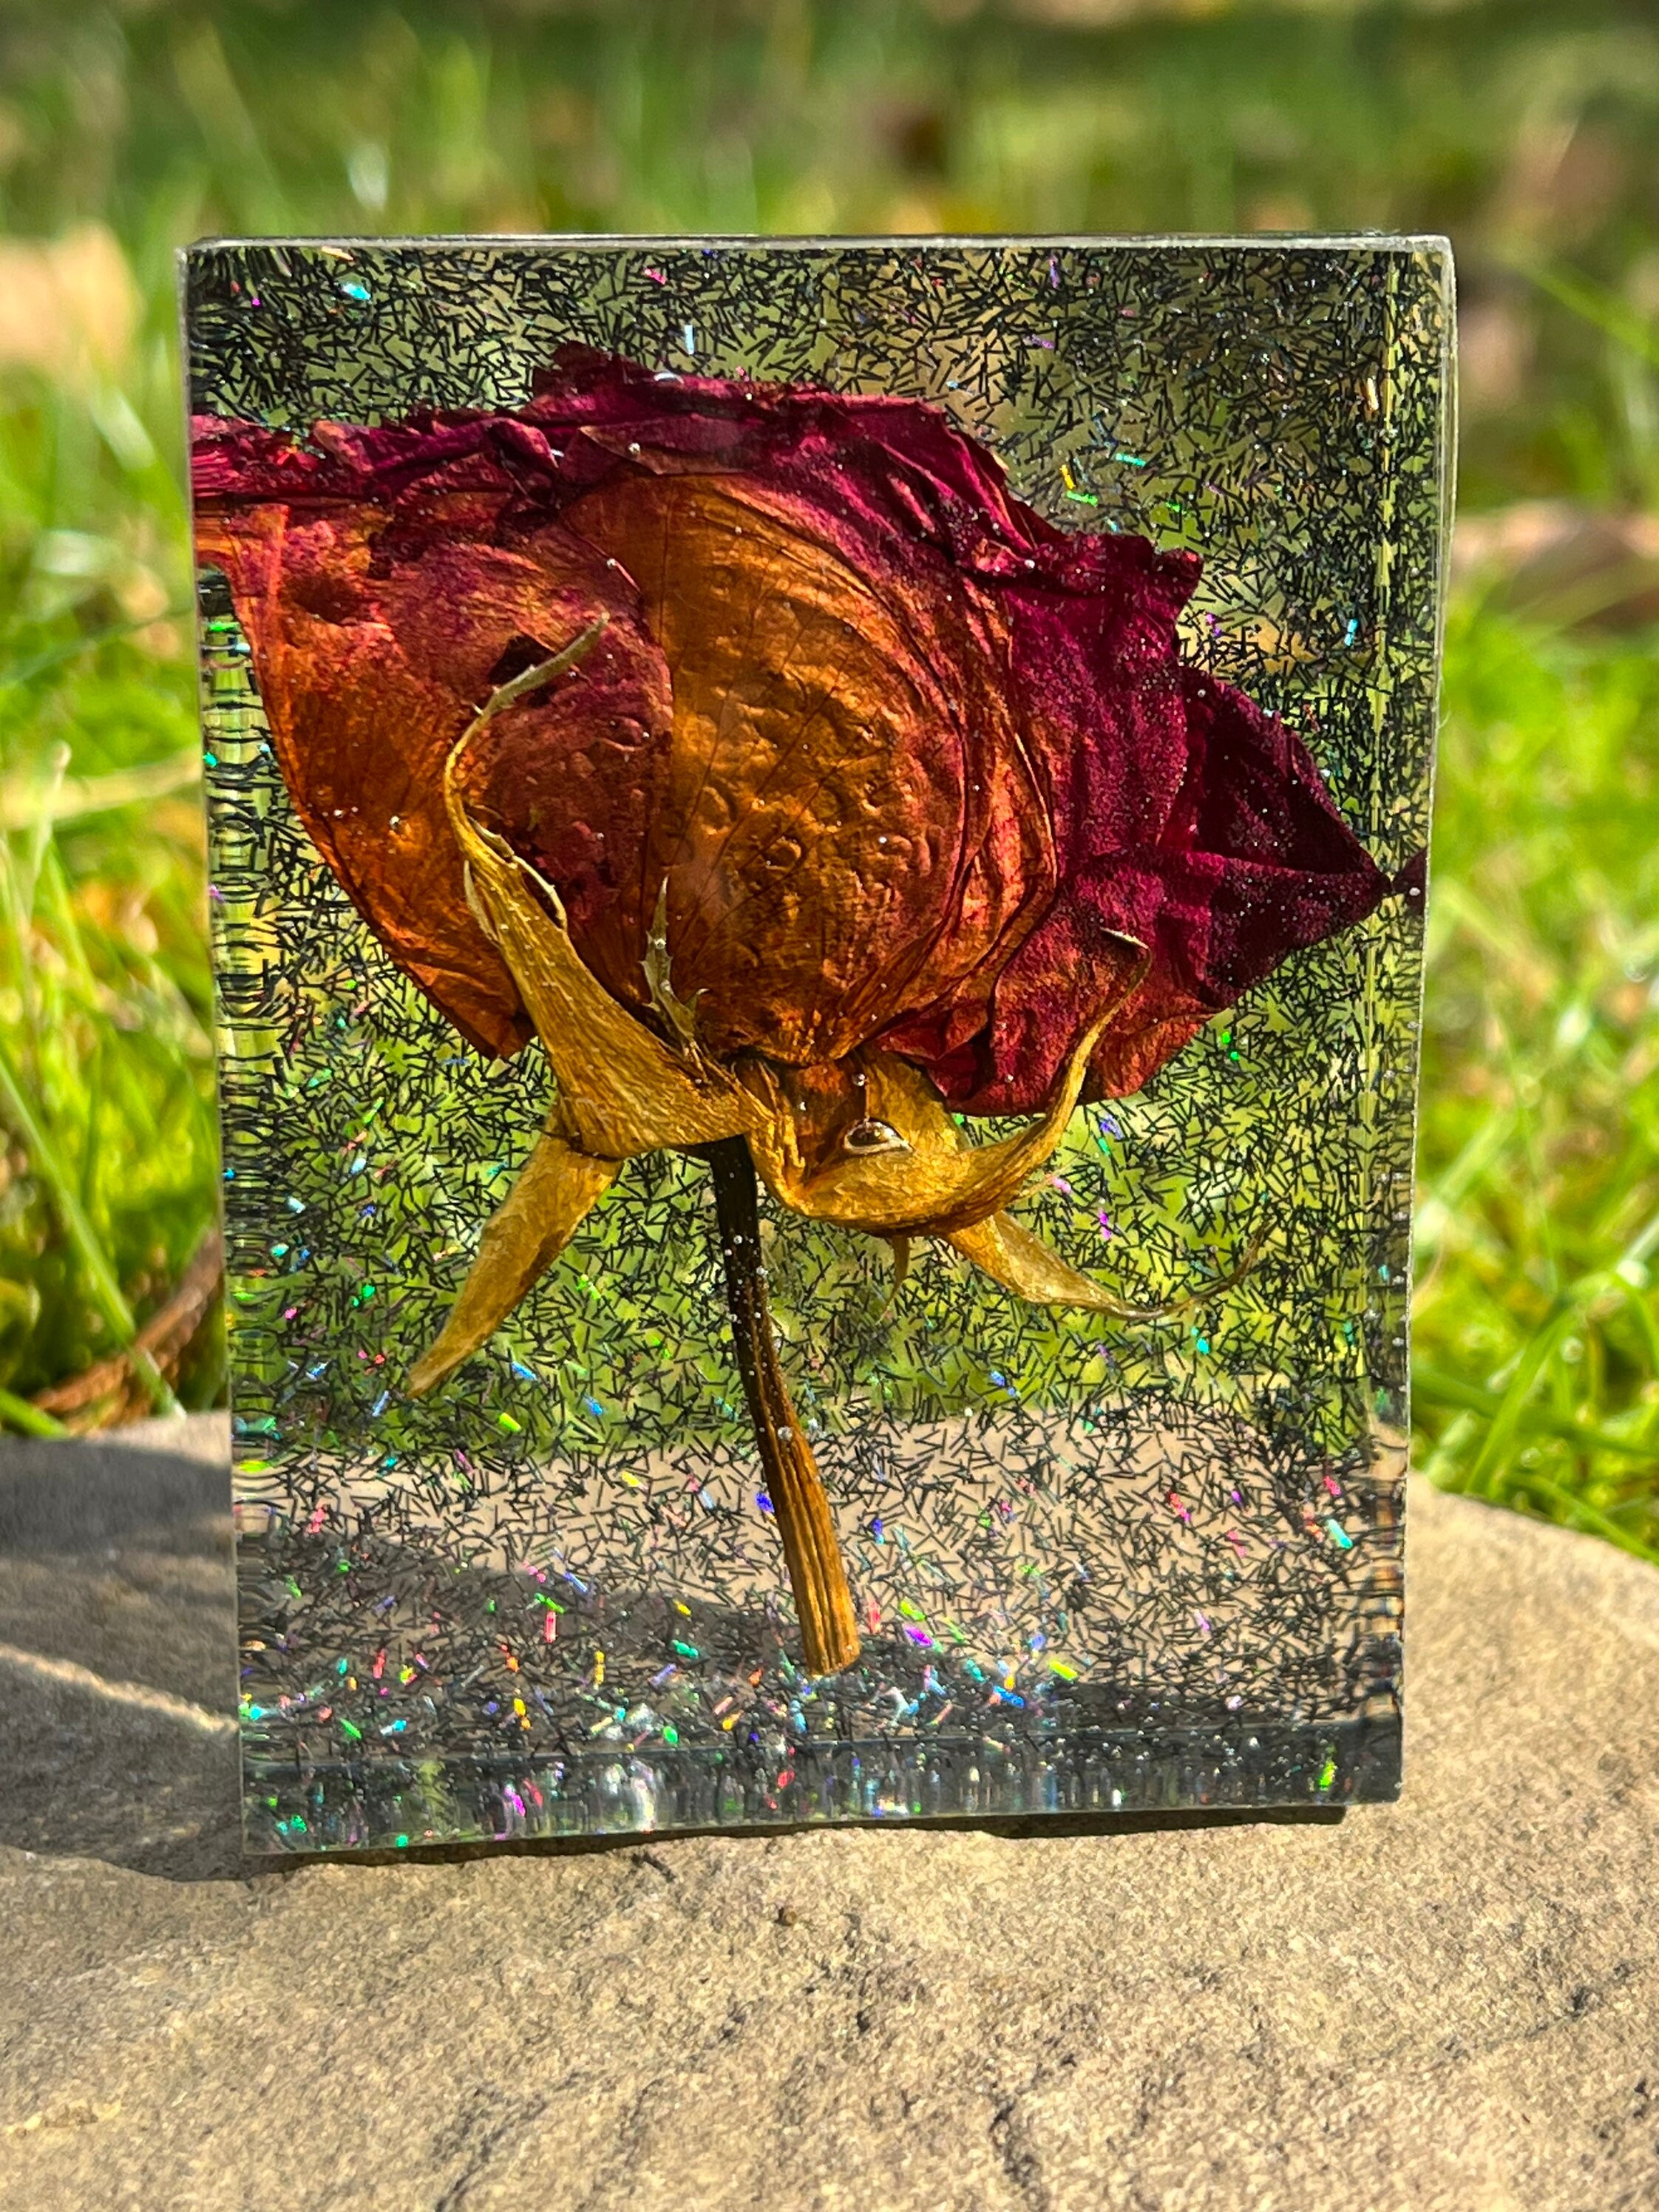 ‘Floating Rose’ Preserved Flower and Epoxy Resin Solid Wood Table